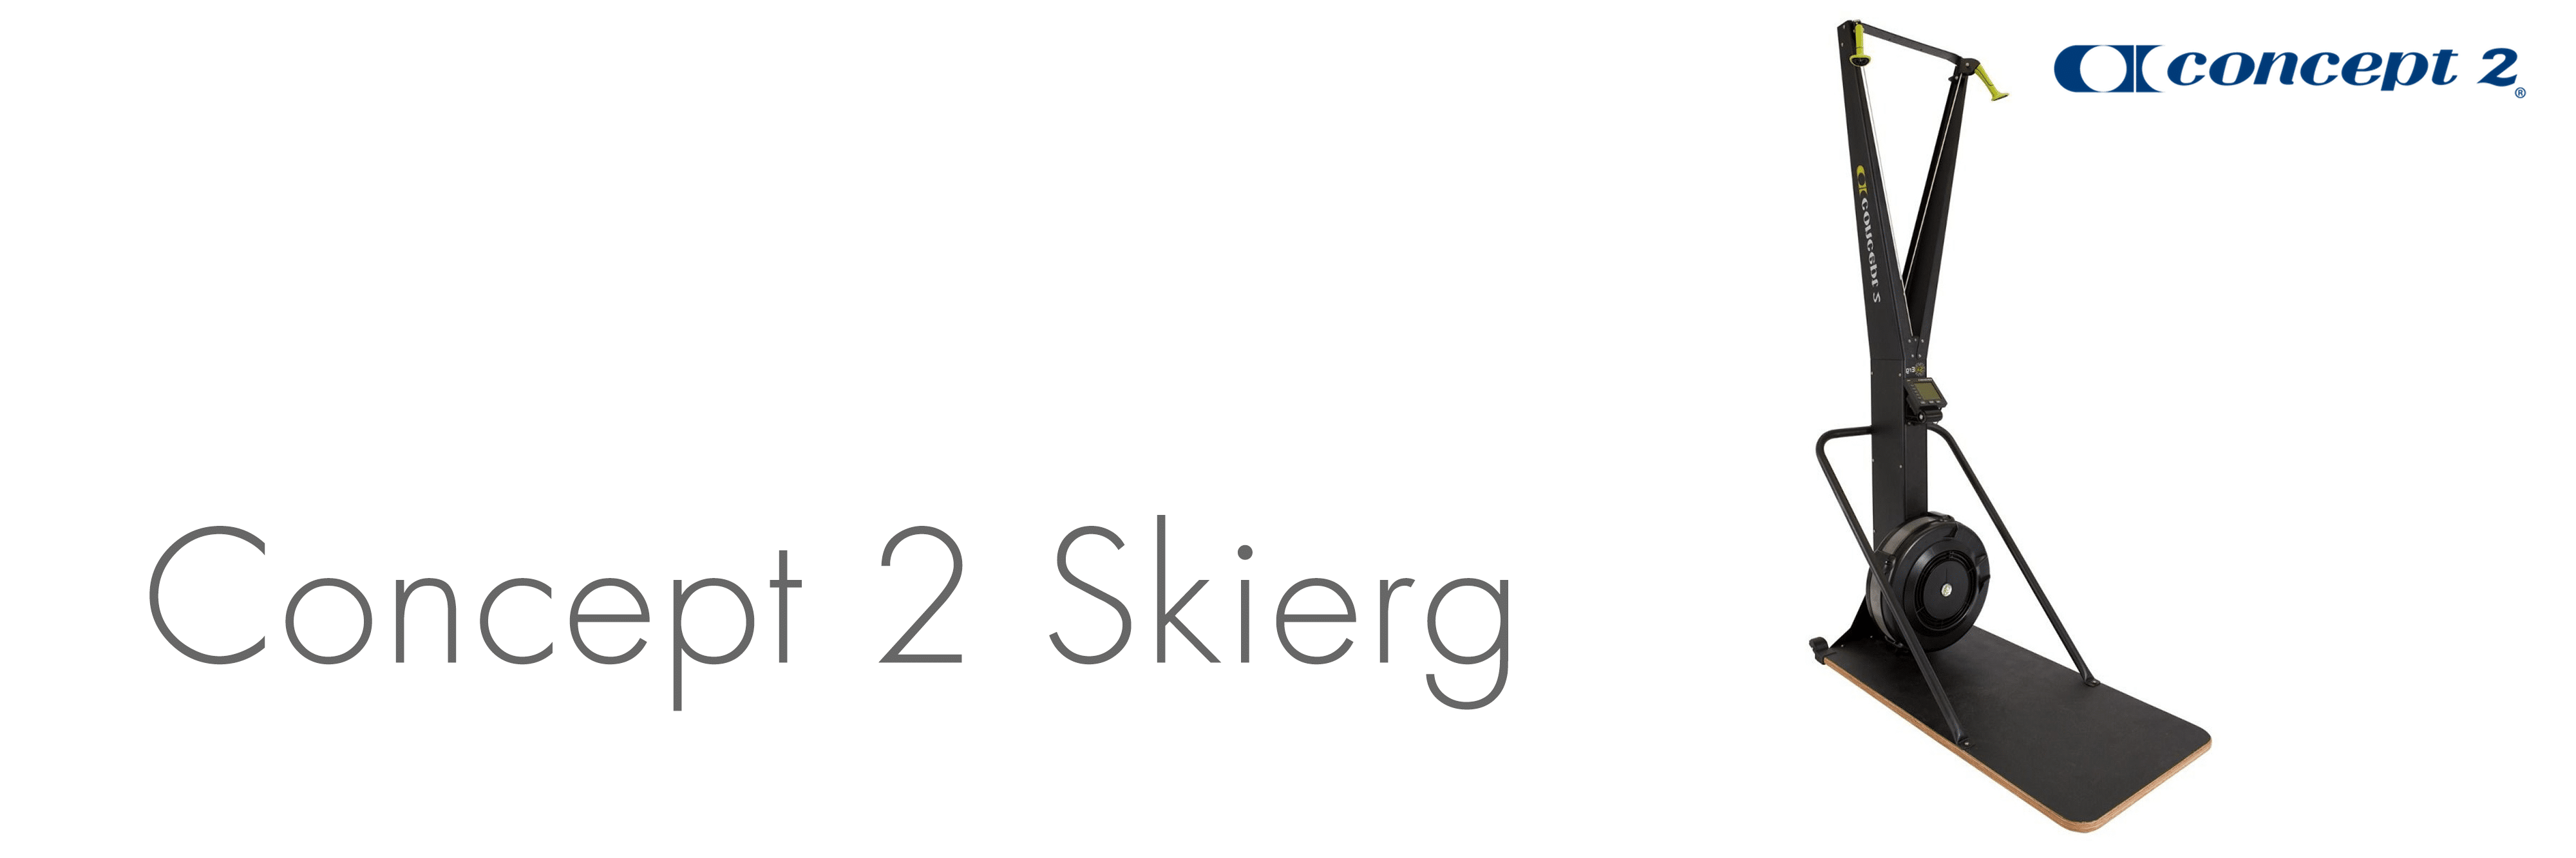 Concept 2 Skierg Luxembourg